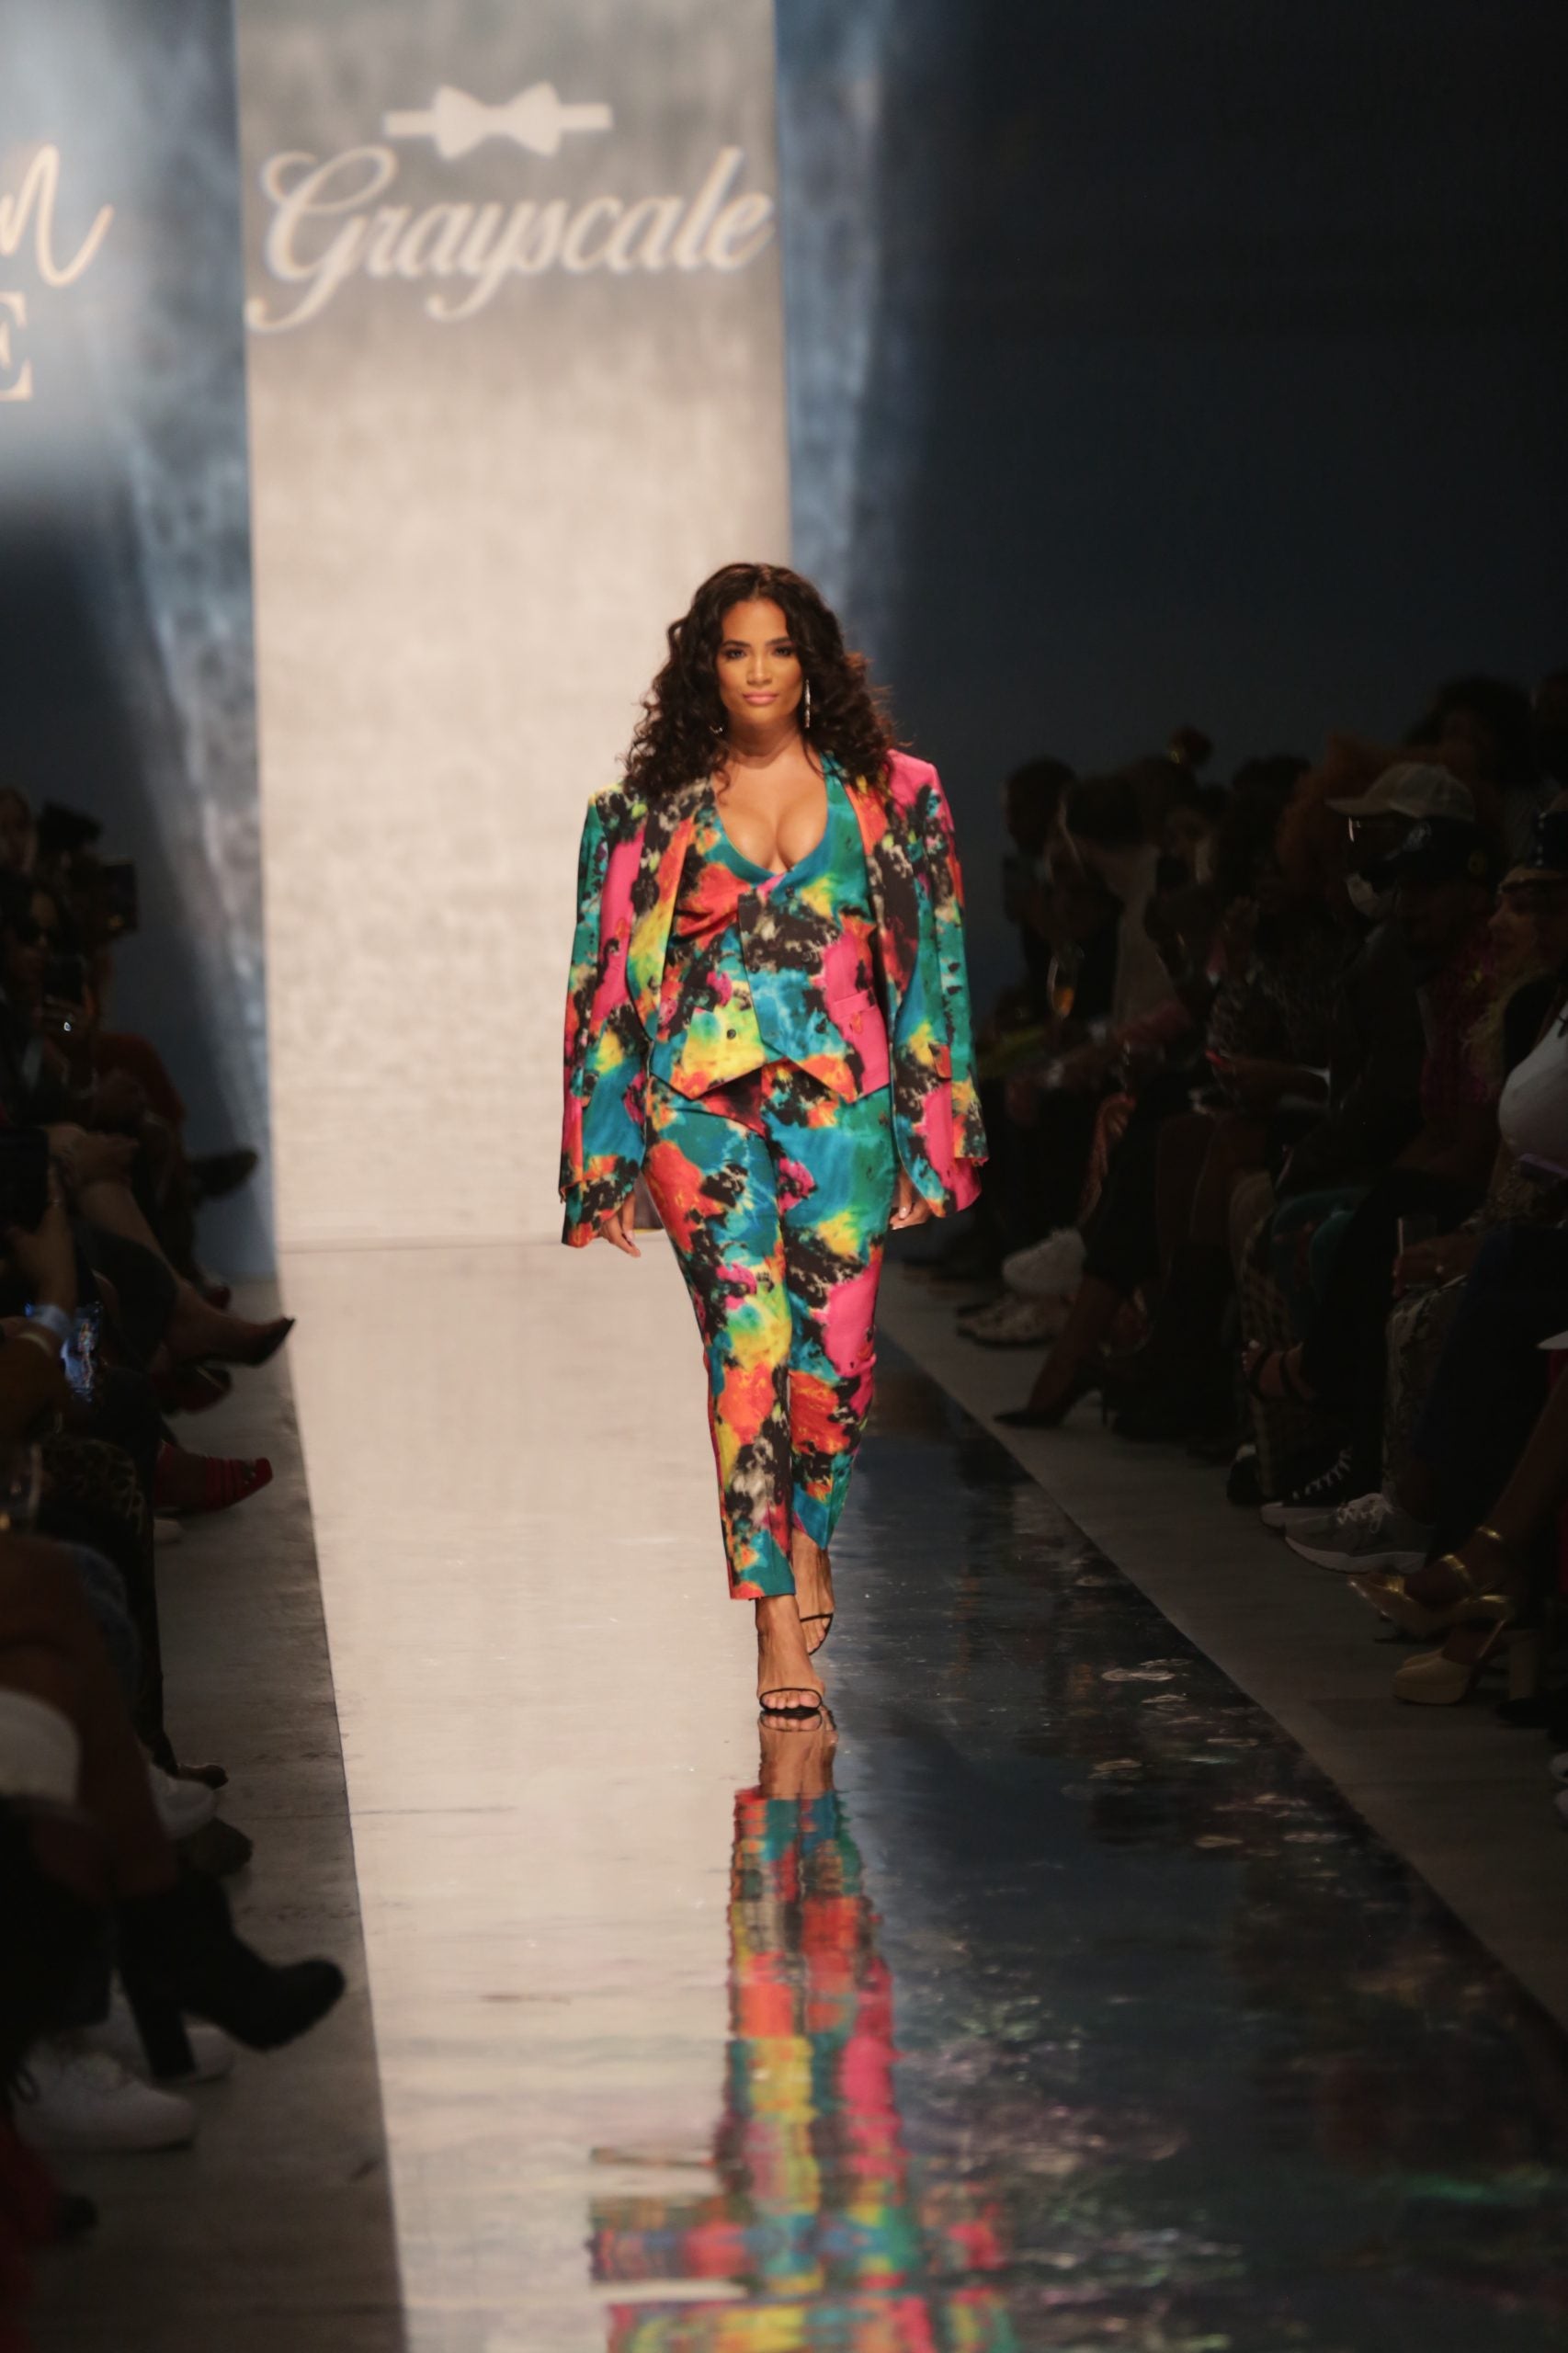 Runway Recap: Grayscale Makes Epic NYFW Debut At ESSENCE Fashion House